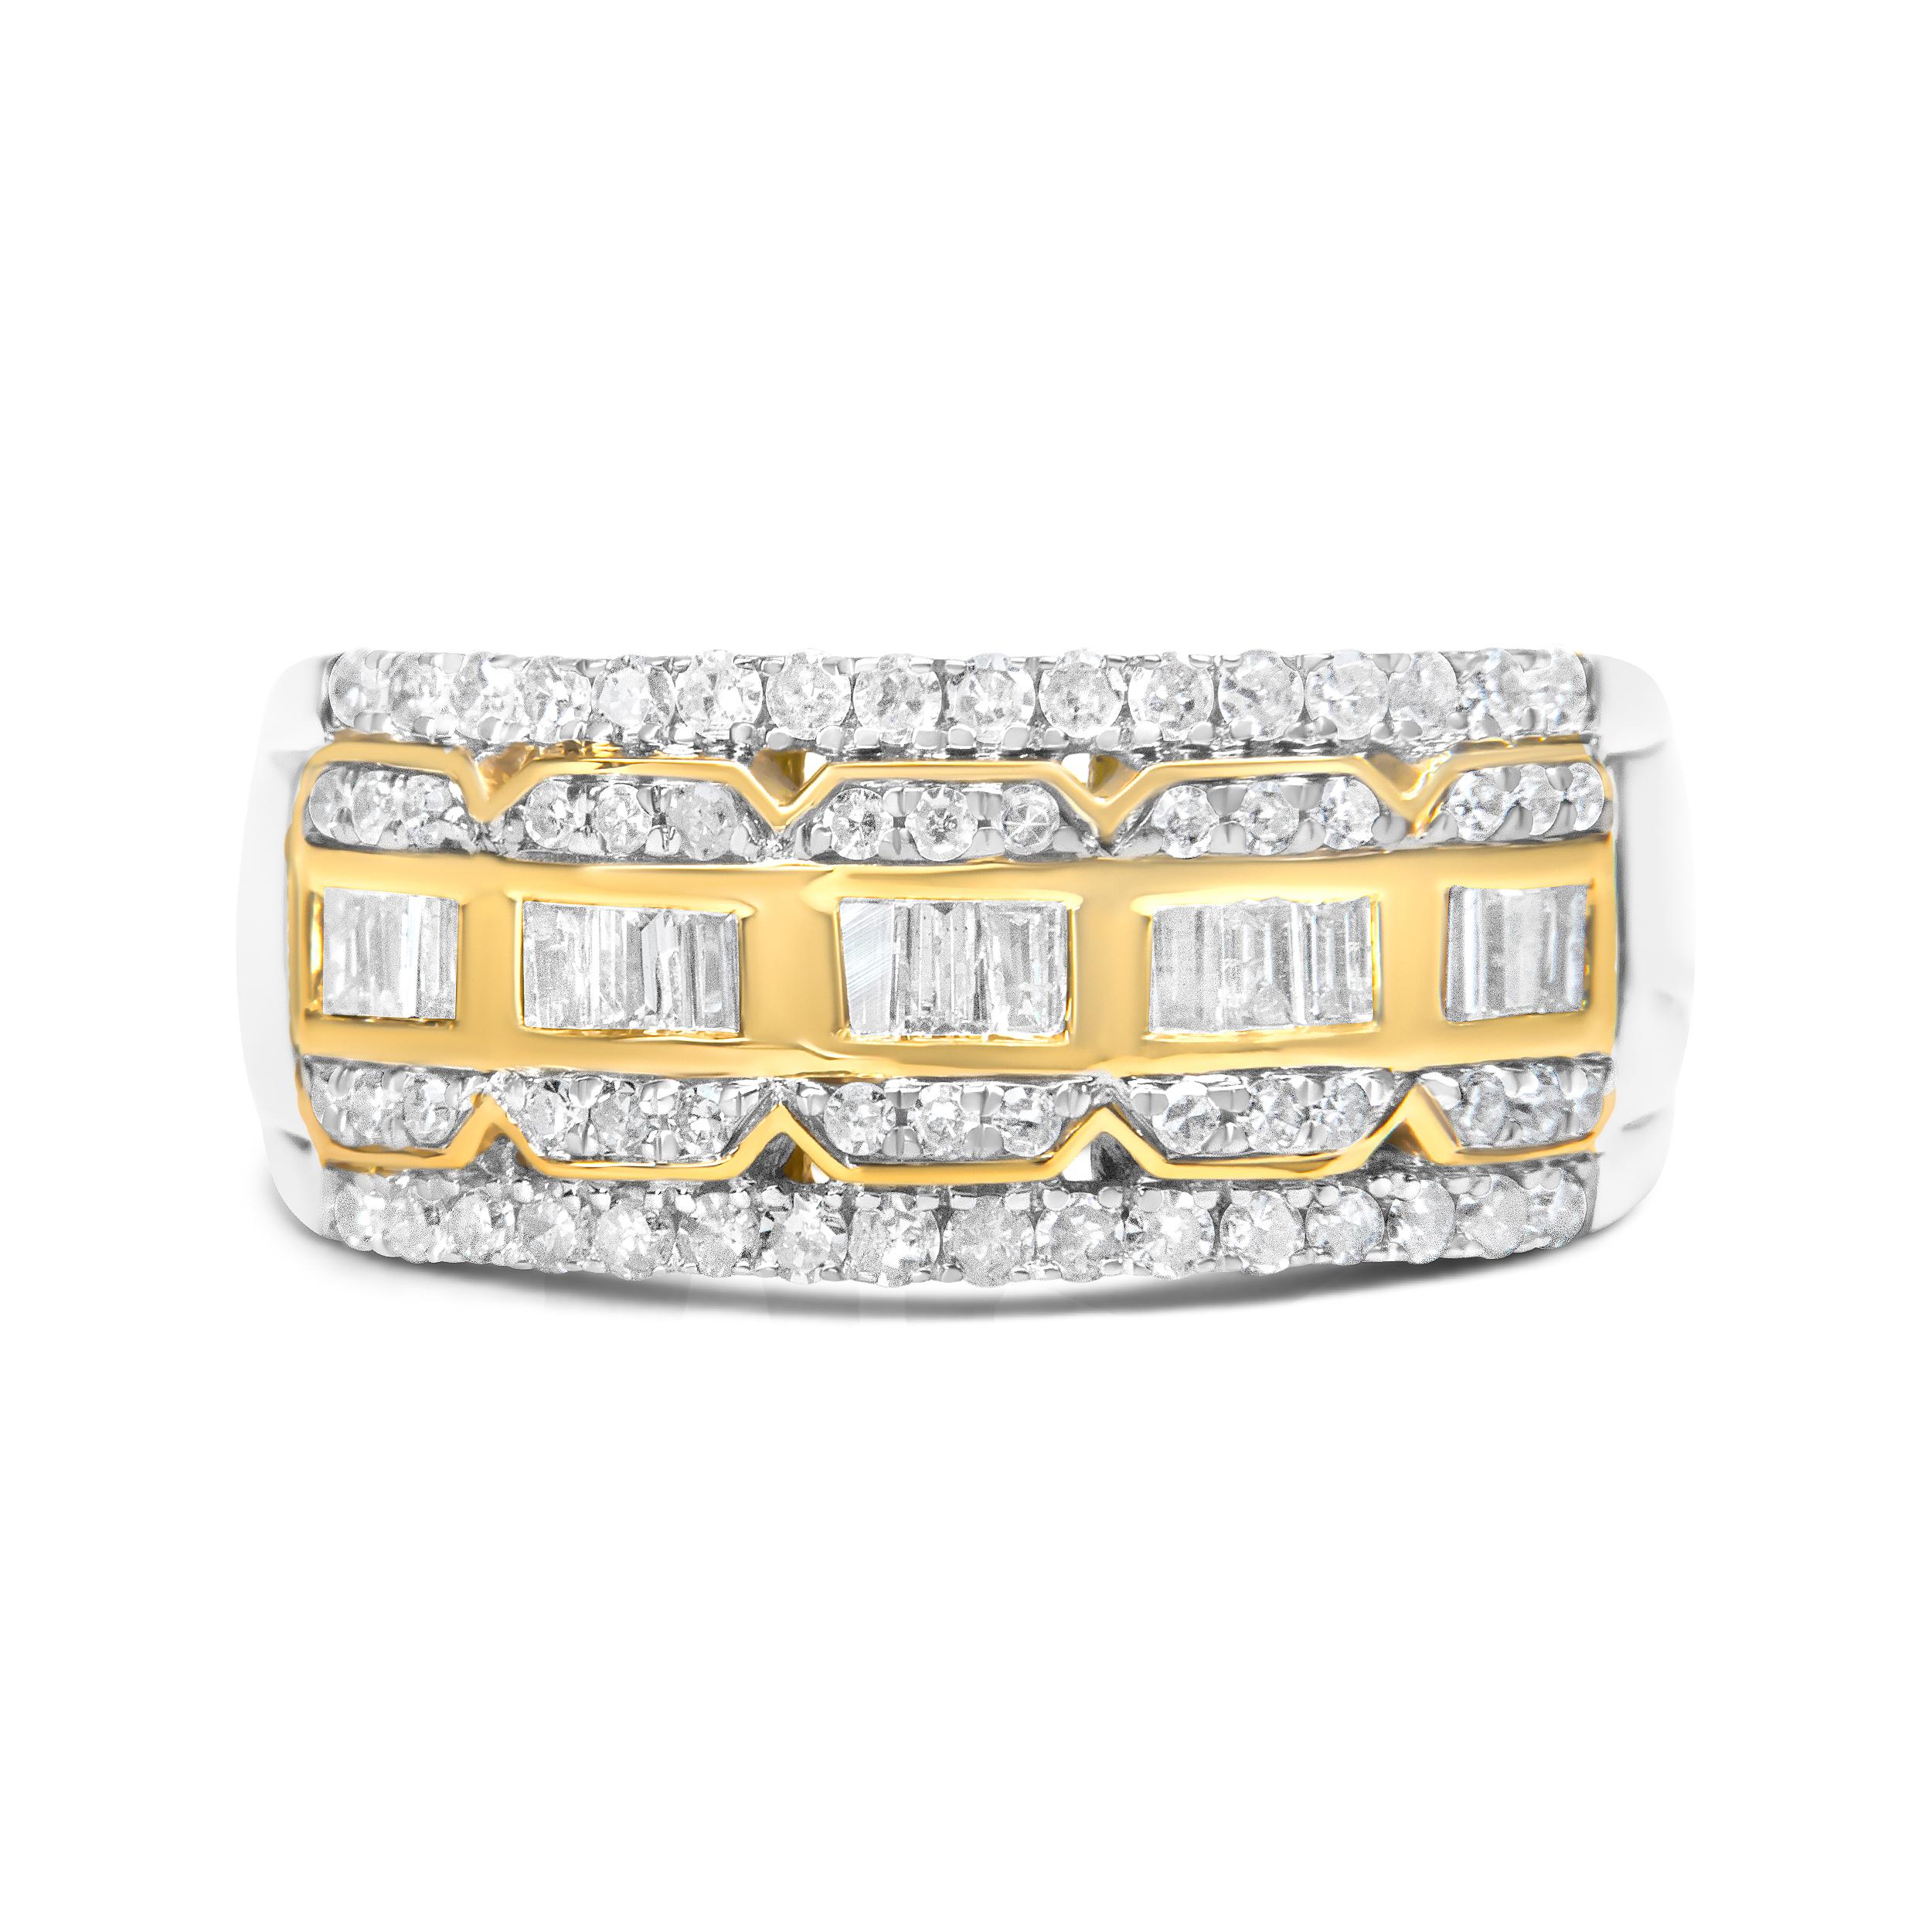 Make a statement with this exquisite art deco inspired ring. Made in 10k white and yellow gold, this piece showcases 1ct TDW of diamonds. A row of baguette cut diamonds sits inside a decorative edging of yellow gold and is accented by round